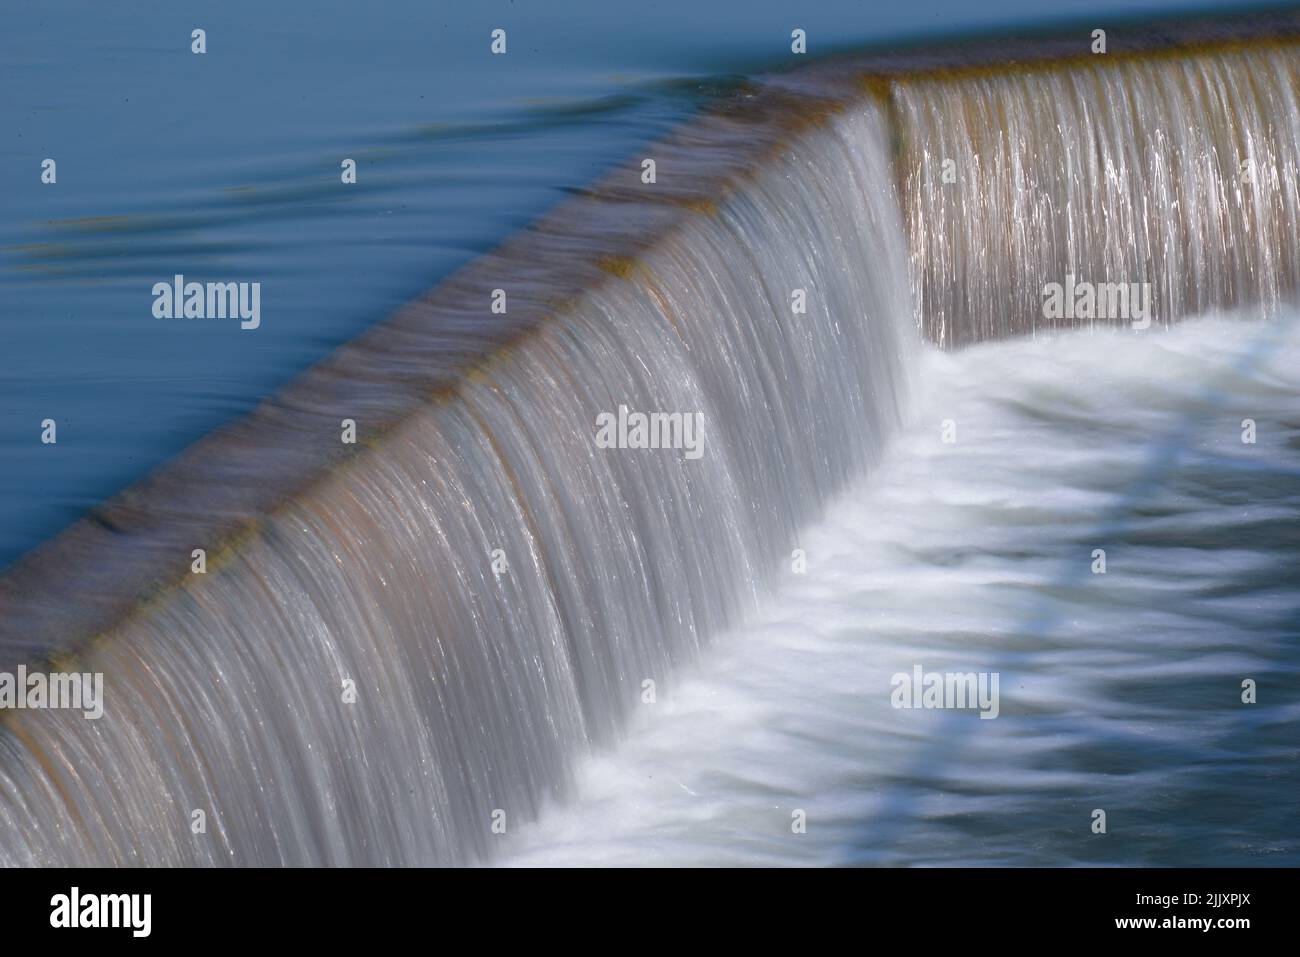 Water flowing over a waterfall of irrigation reservoir Stock Photo